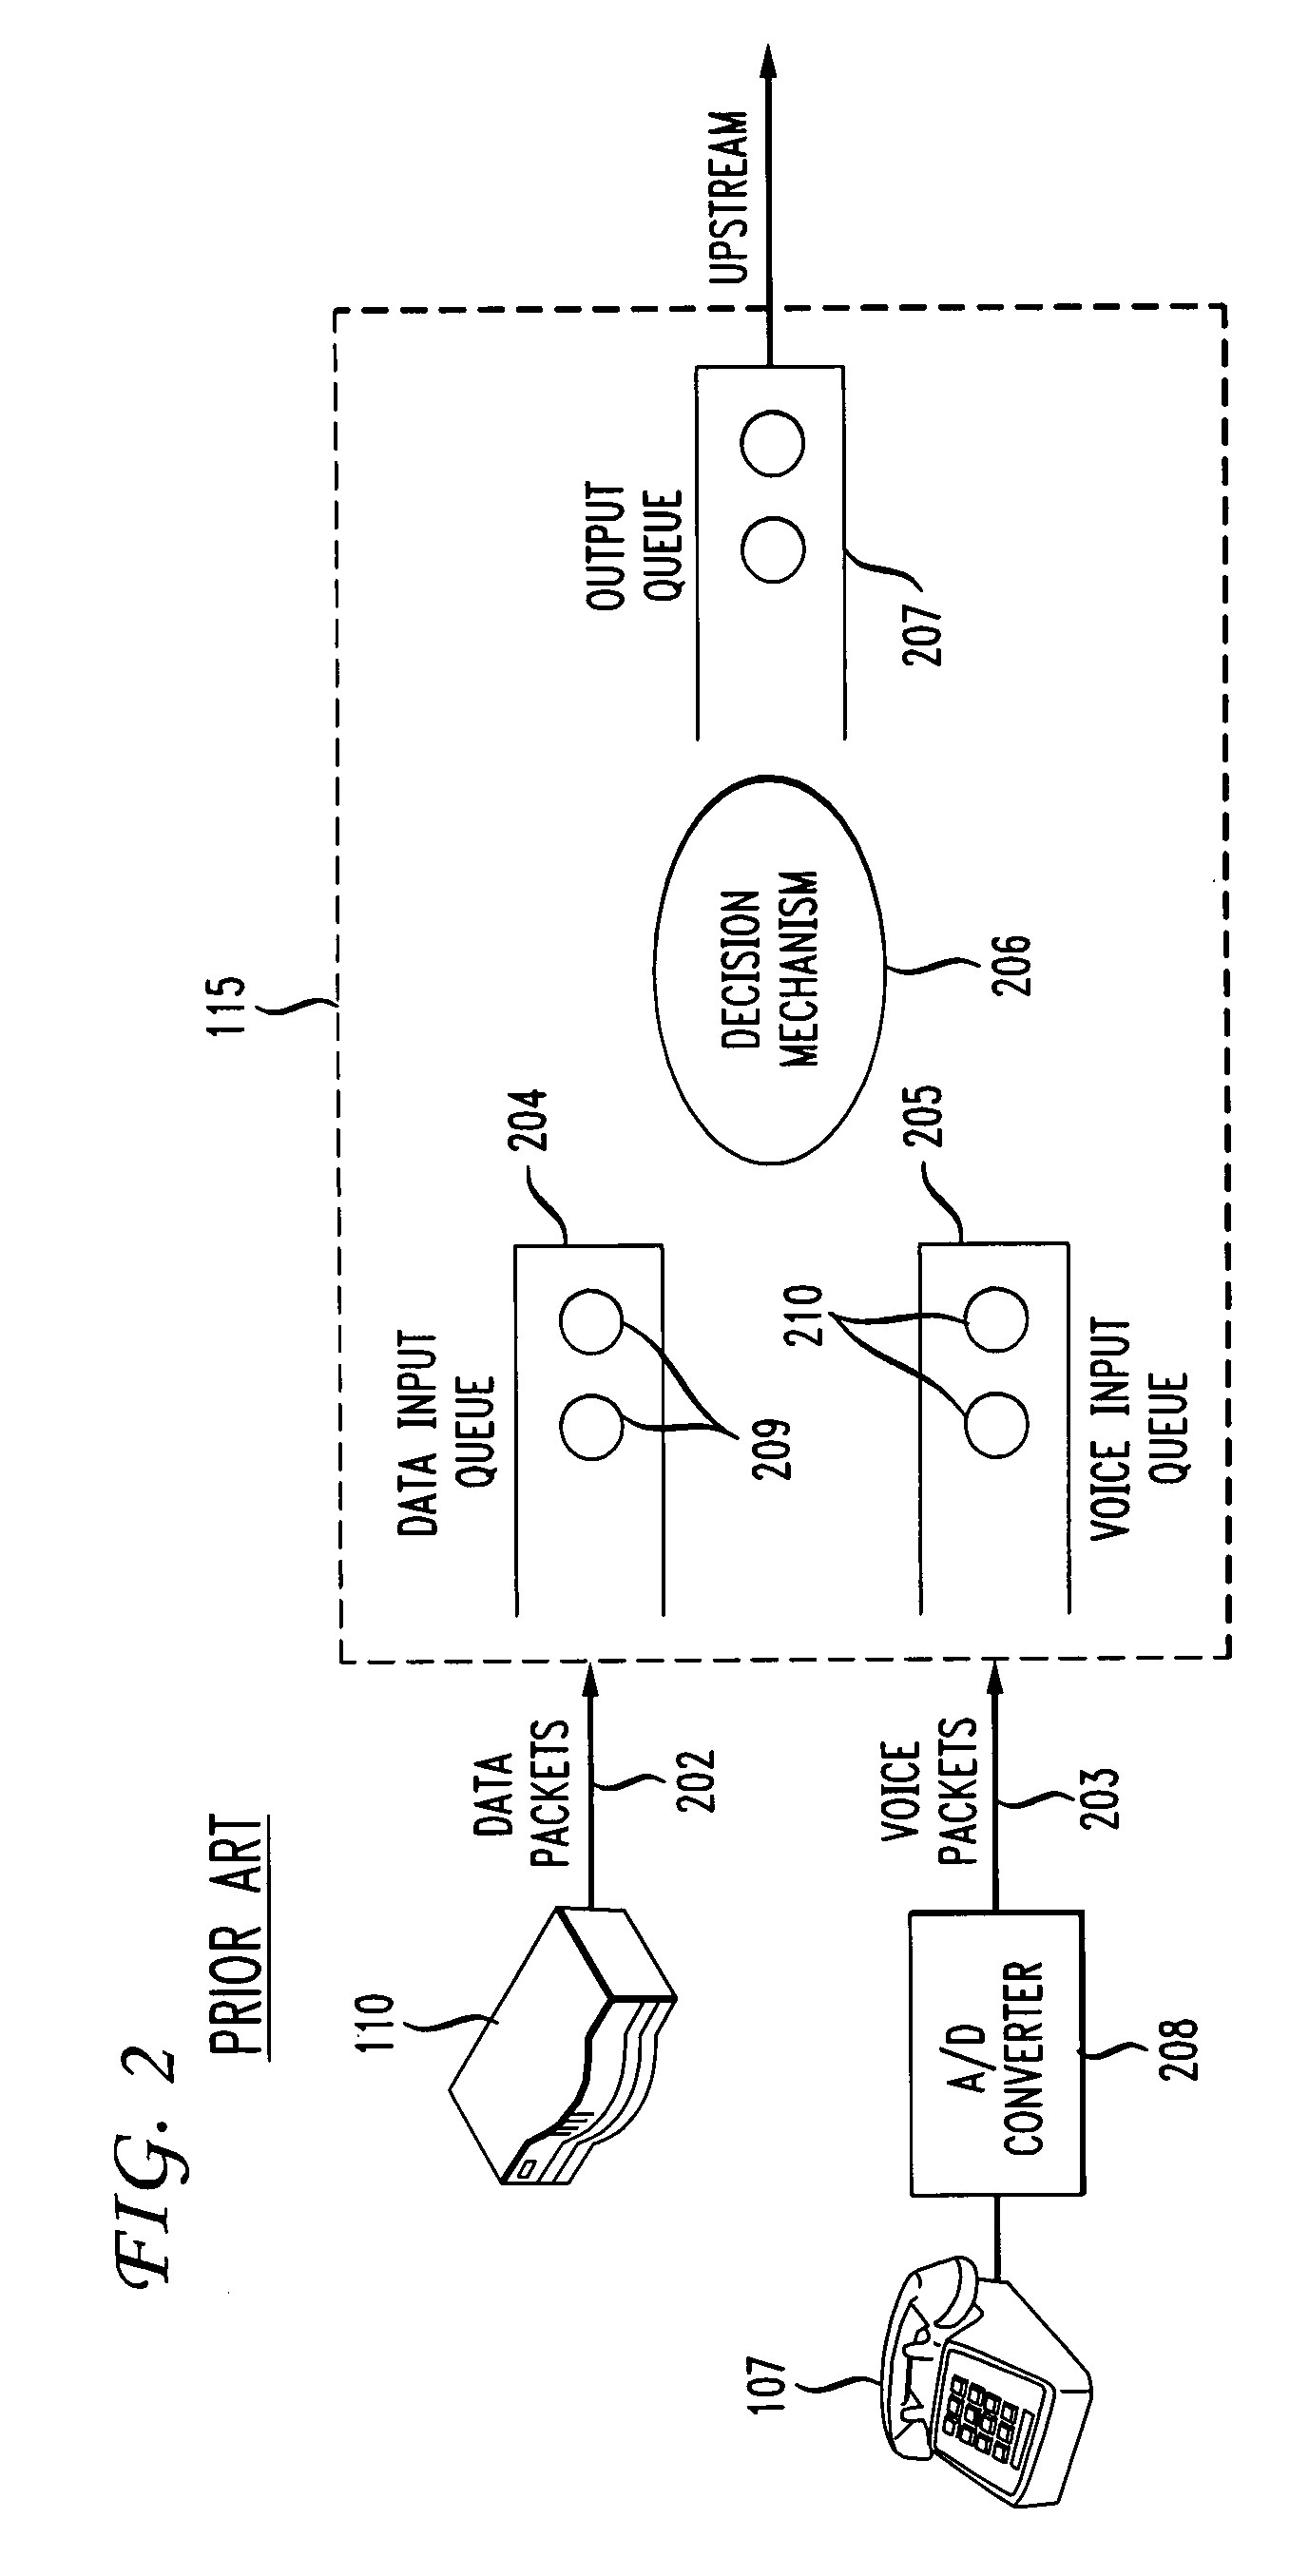 Method and apparatus for controlling the quality of service of voice and data services over variable bandwidth access networks